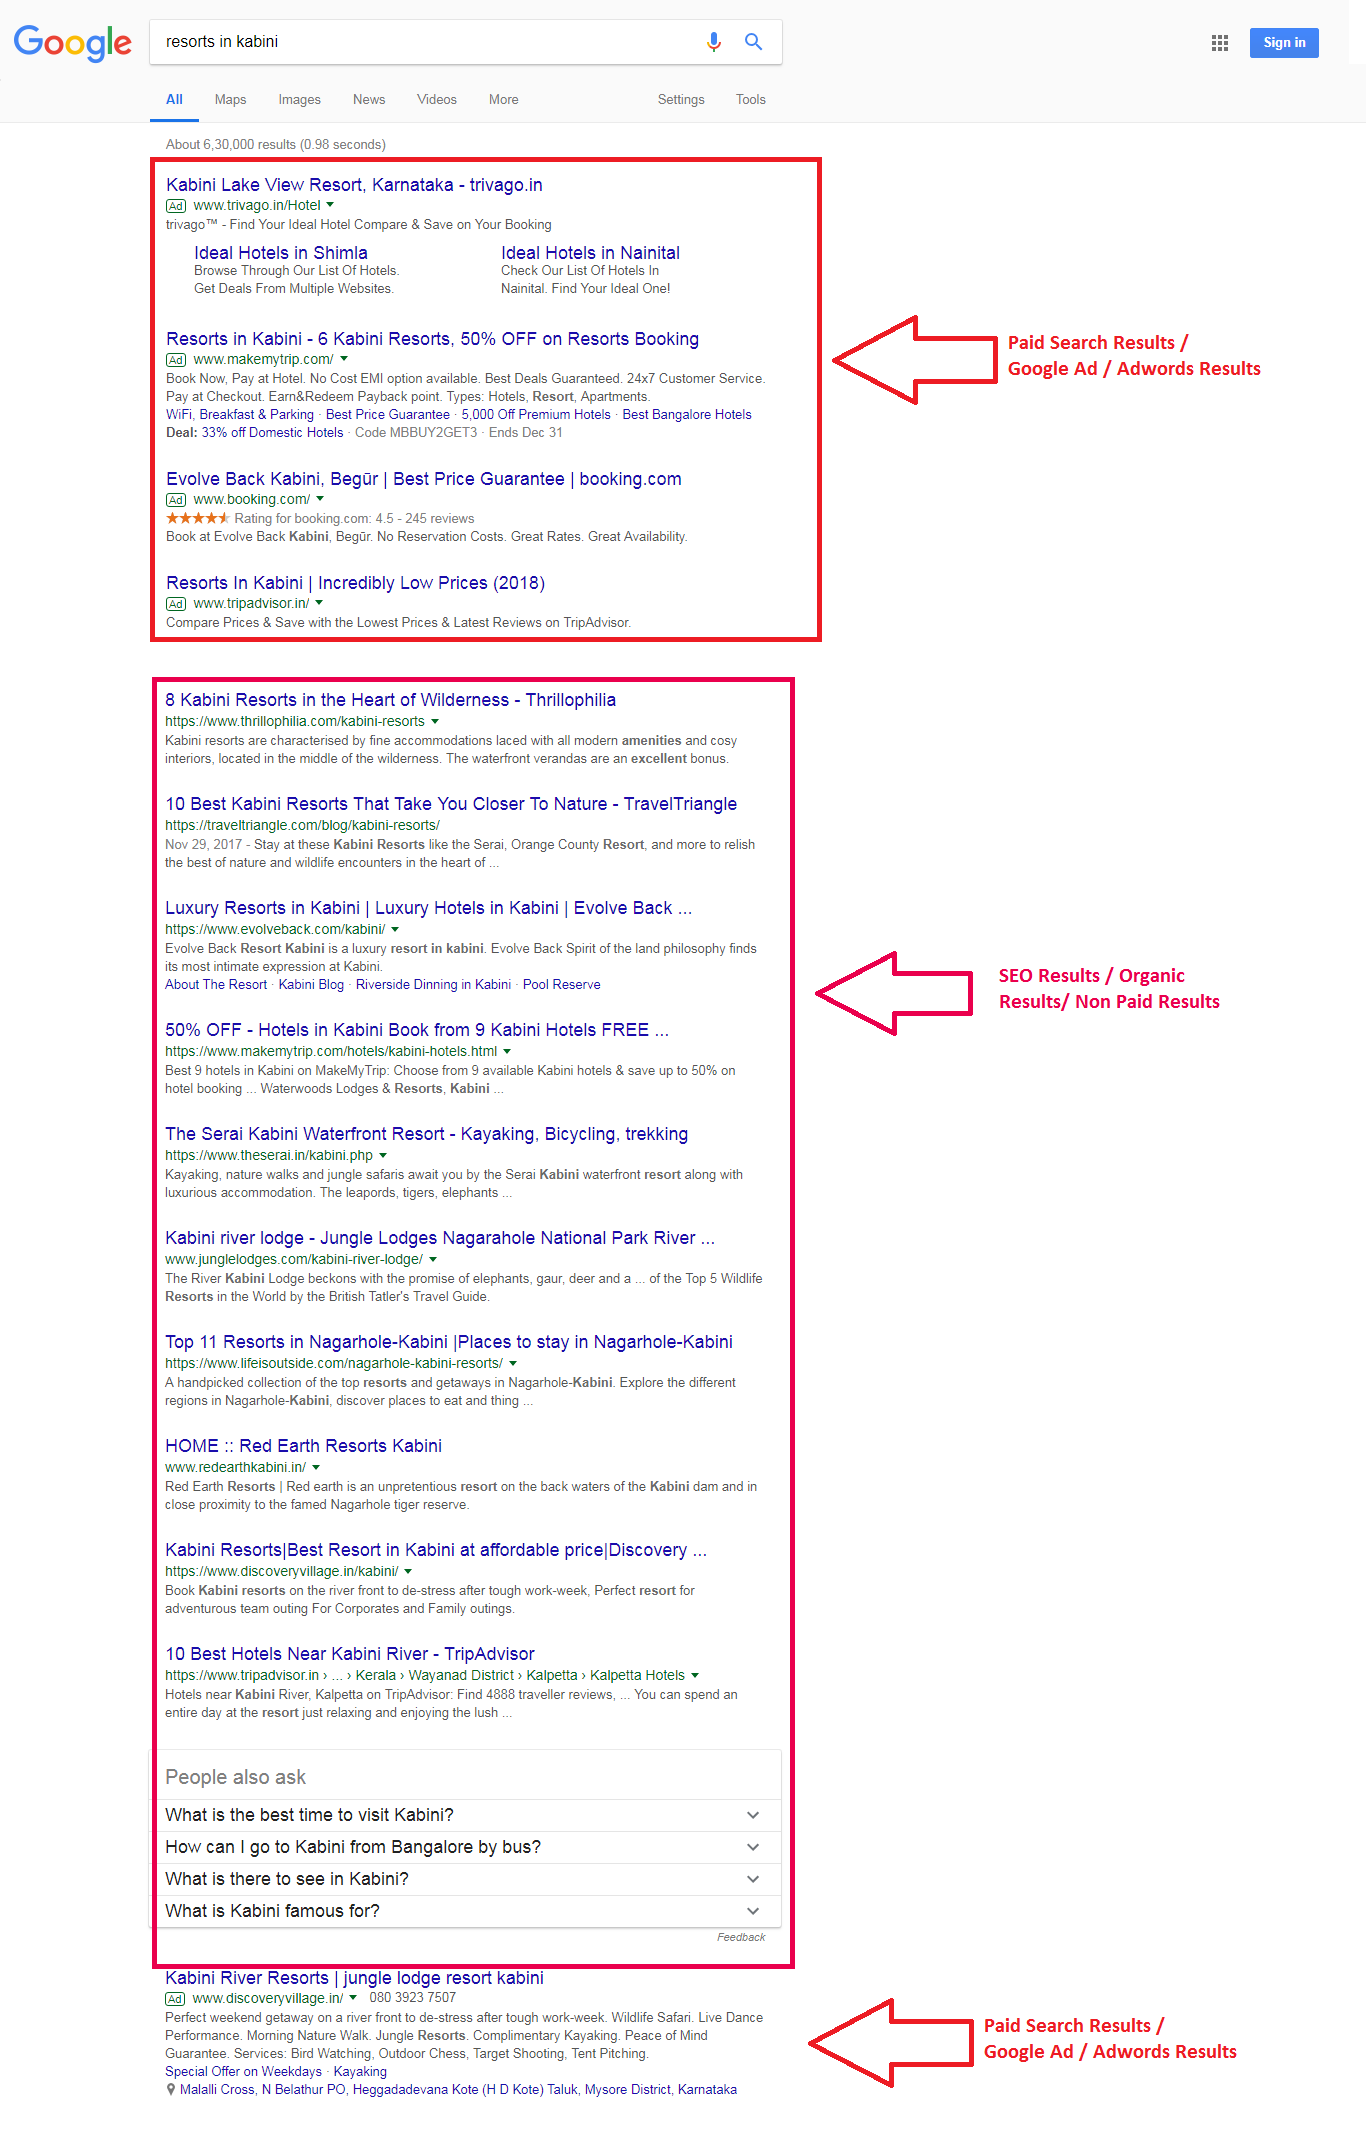 Google Paid Search Results